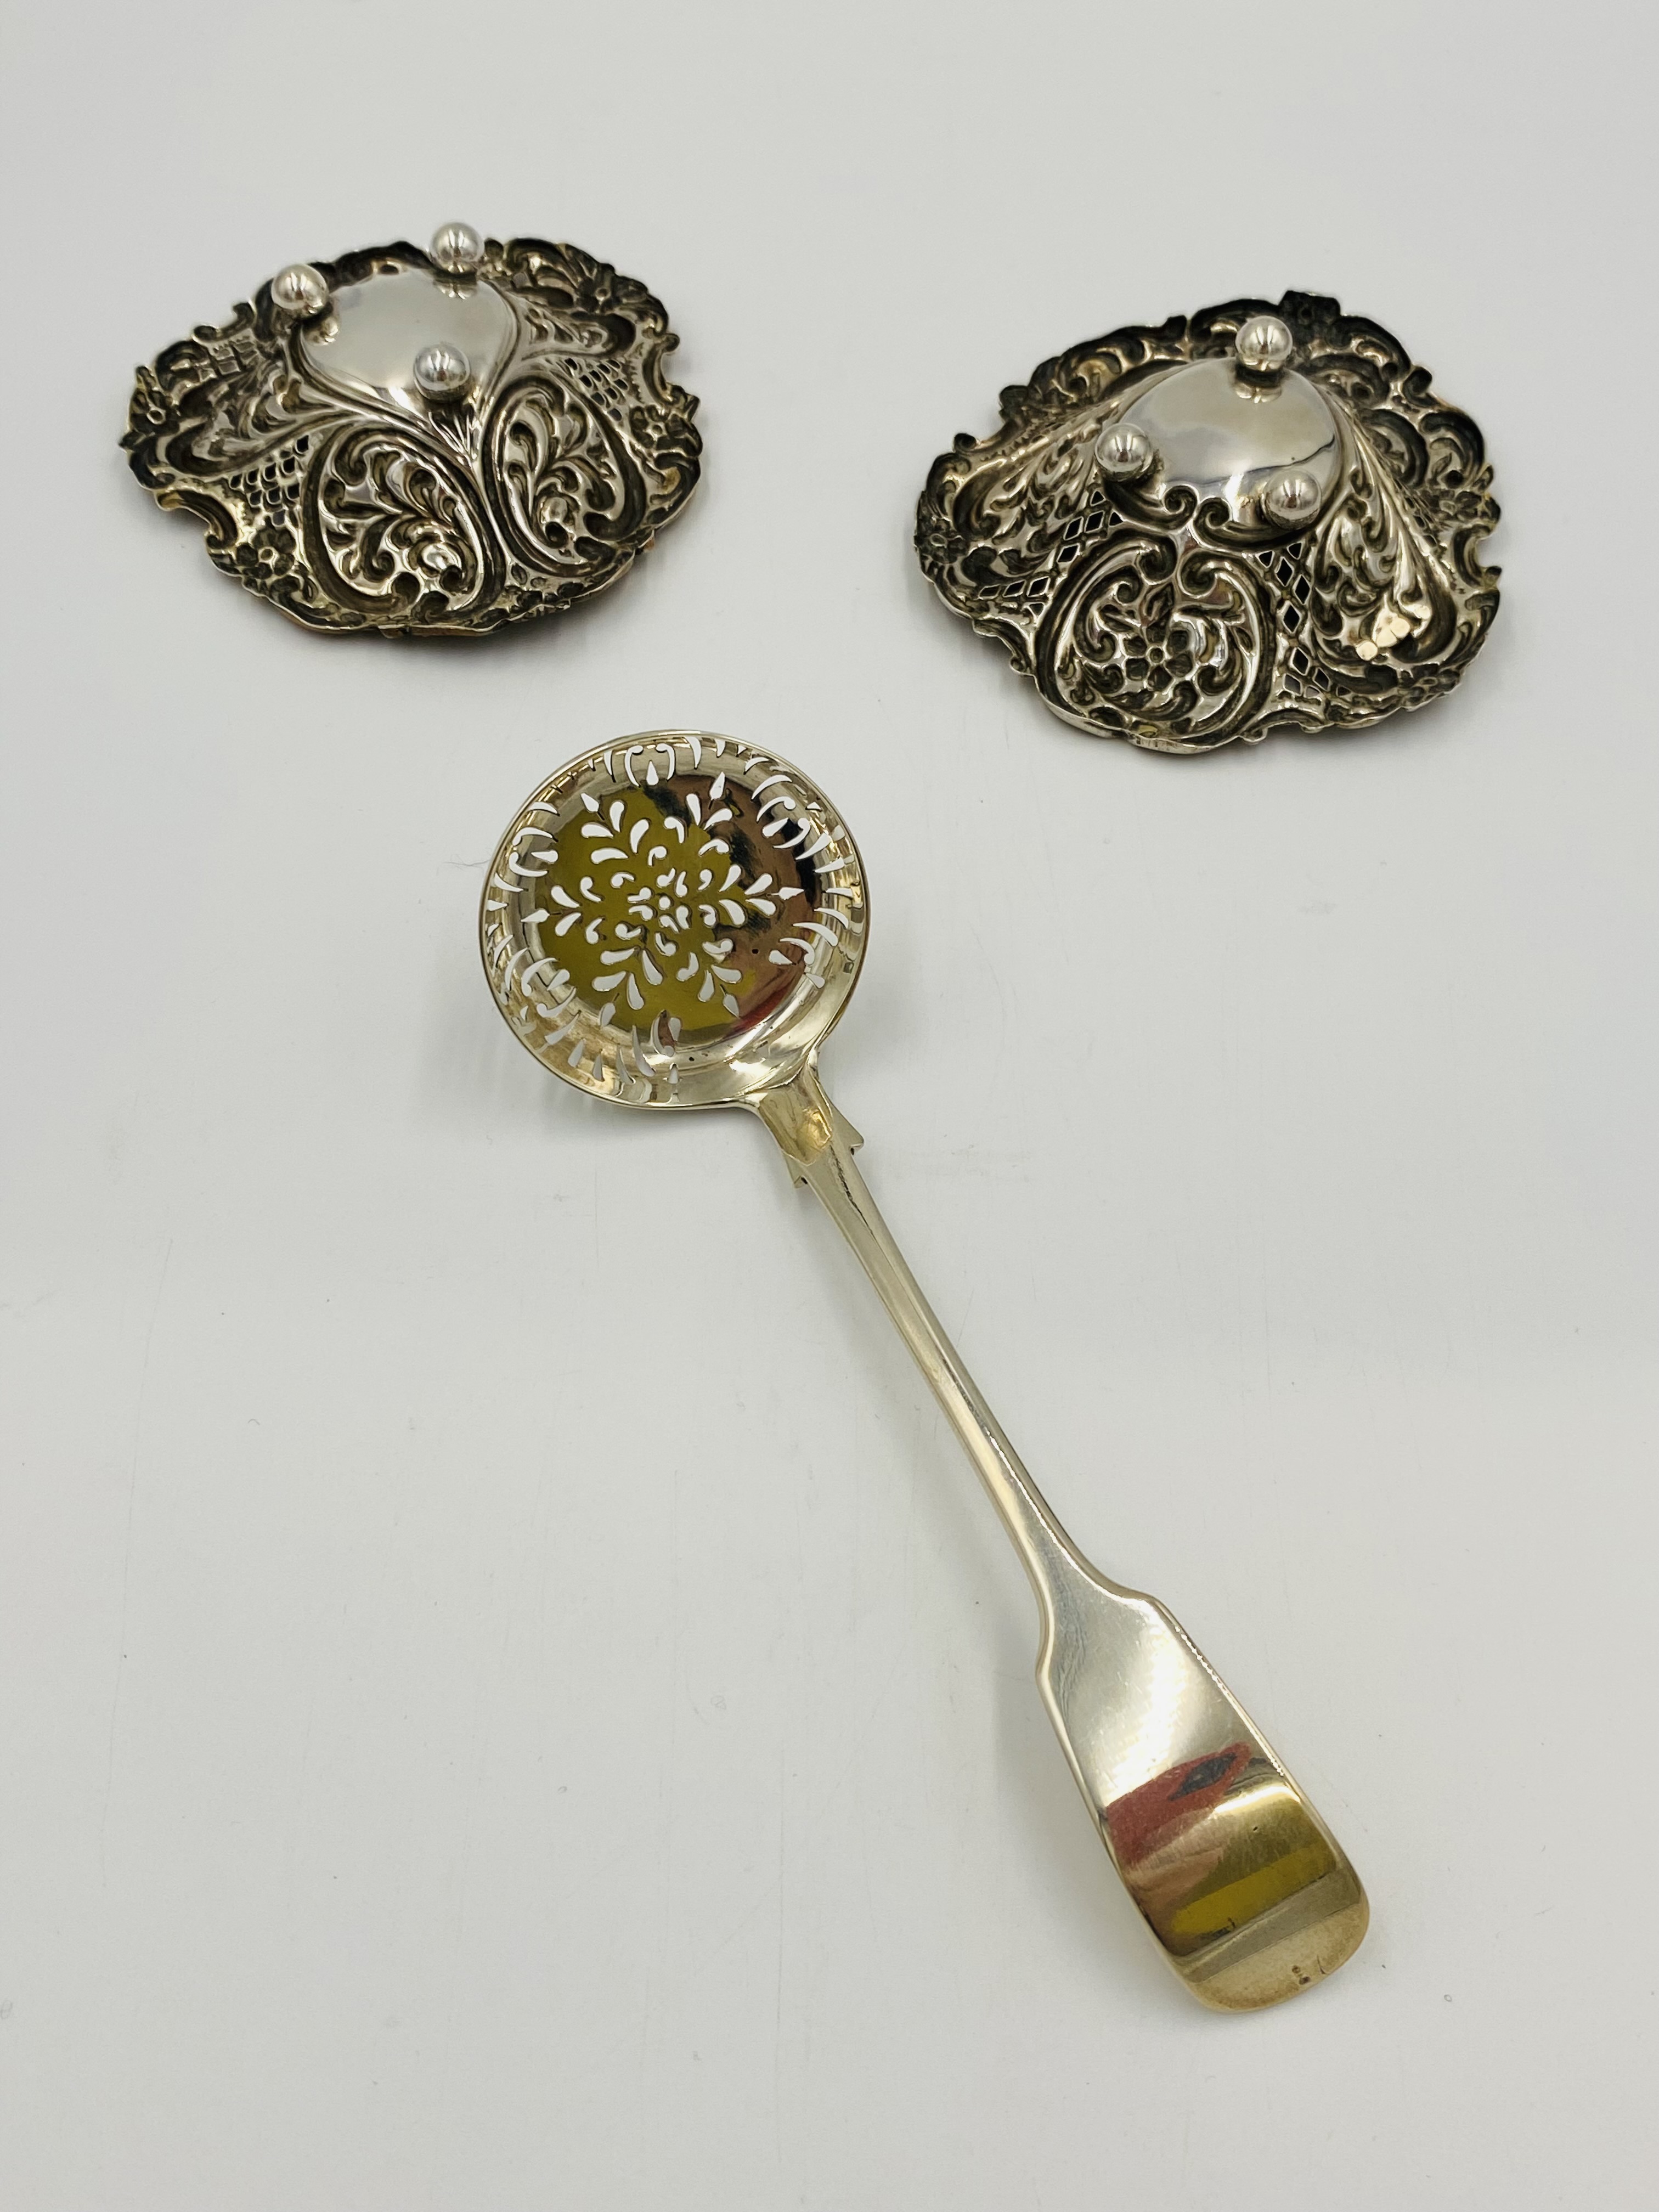 Two silver bon bon dishes and a silver sifter ladle - Image 3 of 5